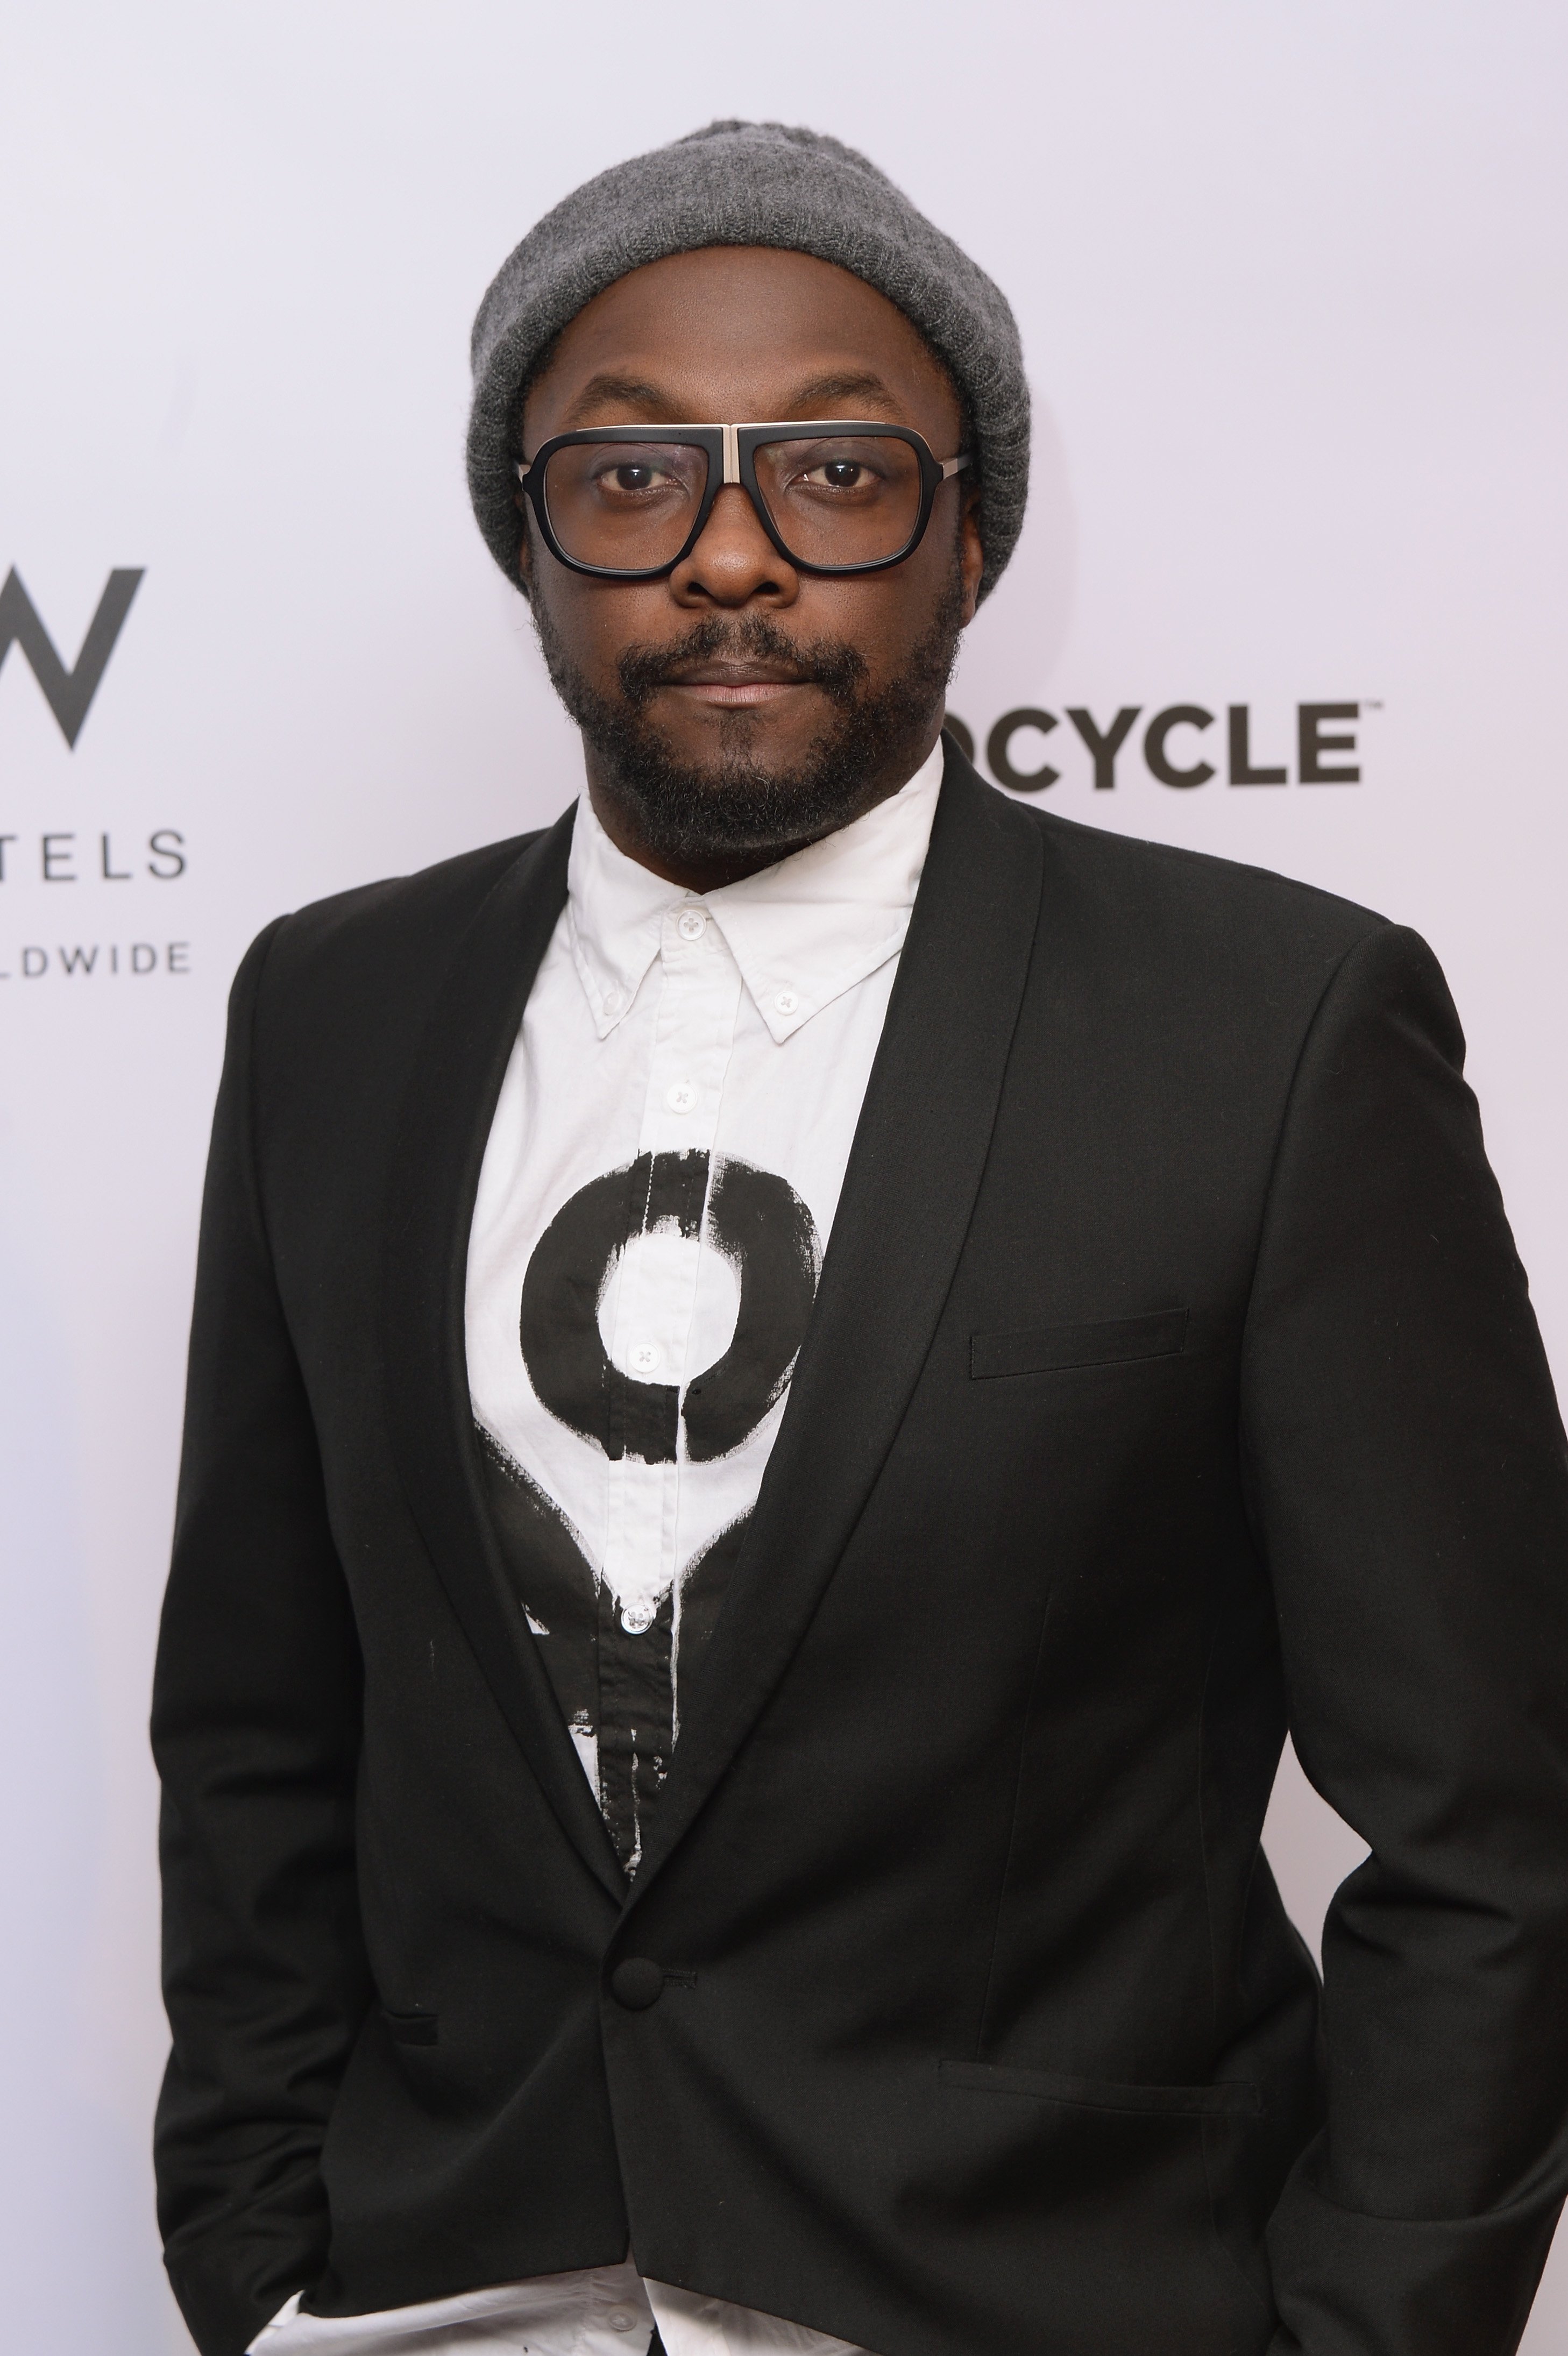 Will.i.am at W New York Launch Event on April 13, 2015 in New York City | Photo: Getty Images